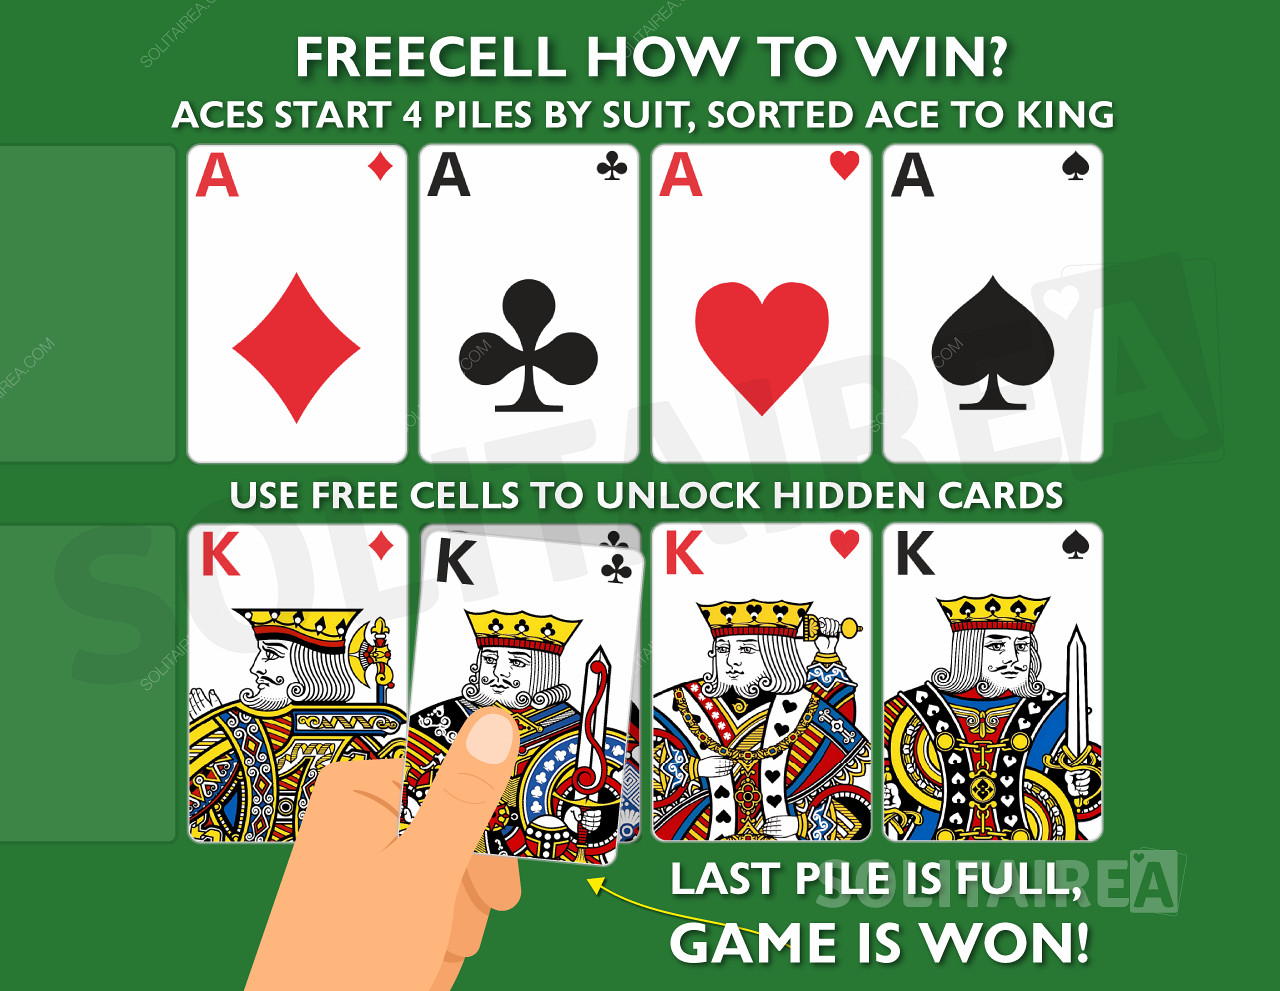 How to win the game? Complete the 4 piles of same suited cards, sorted Ace to Kings.